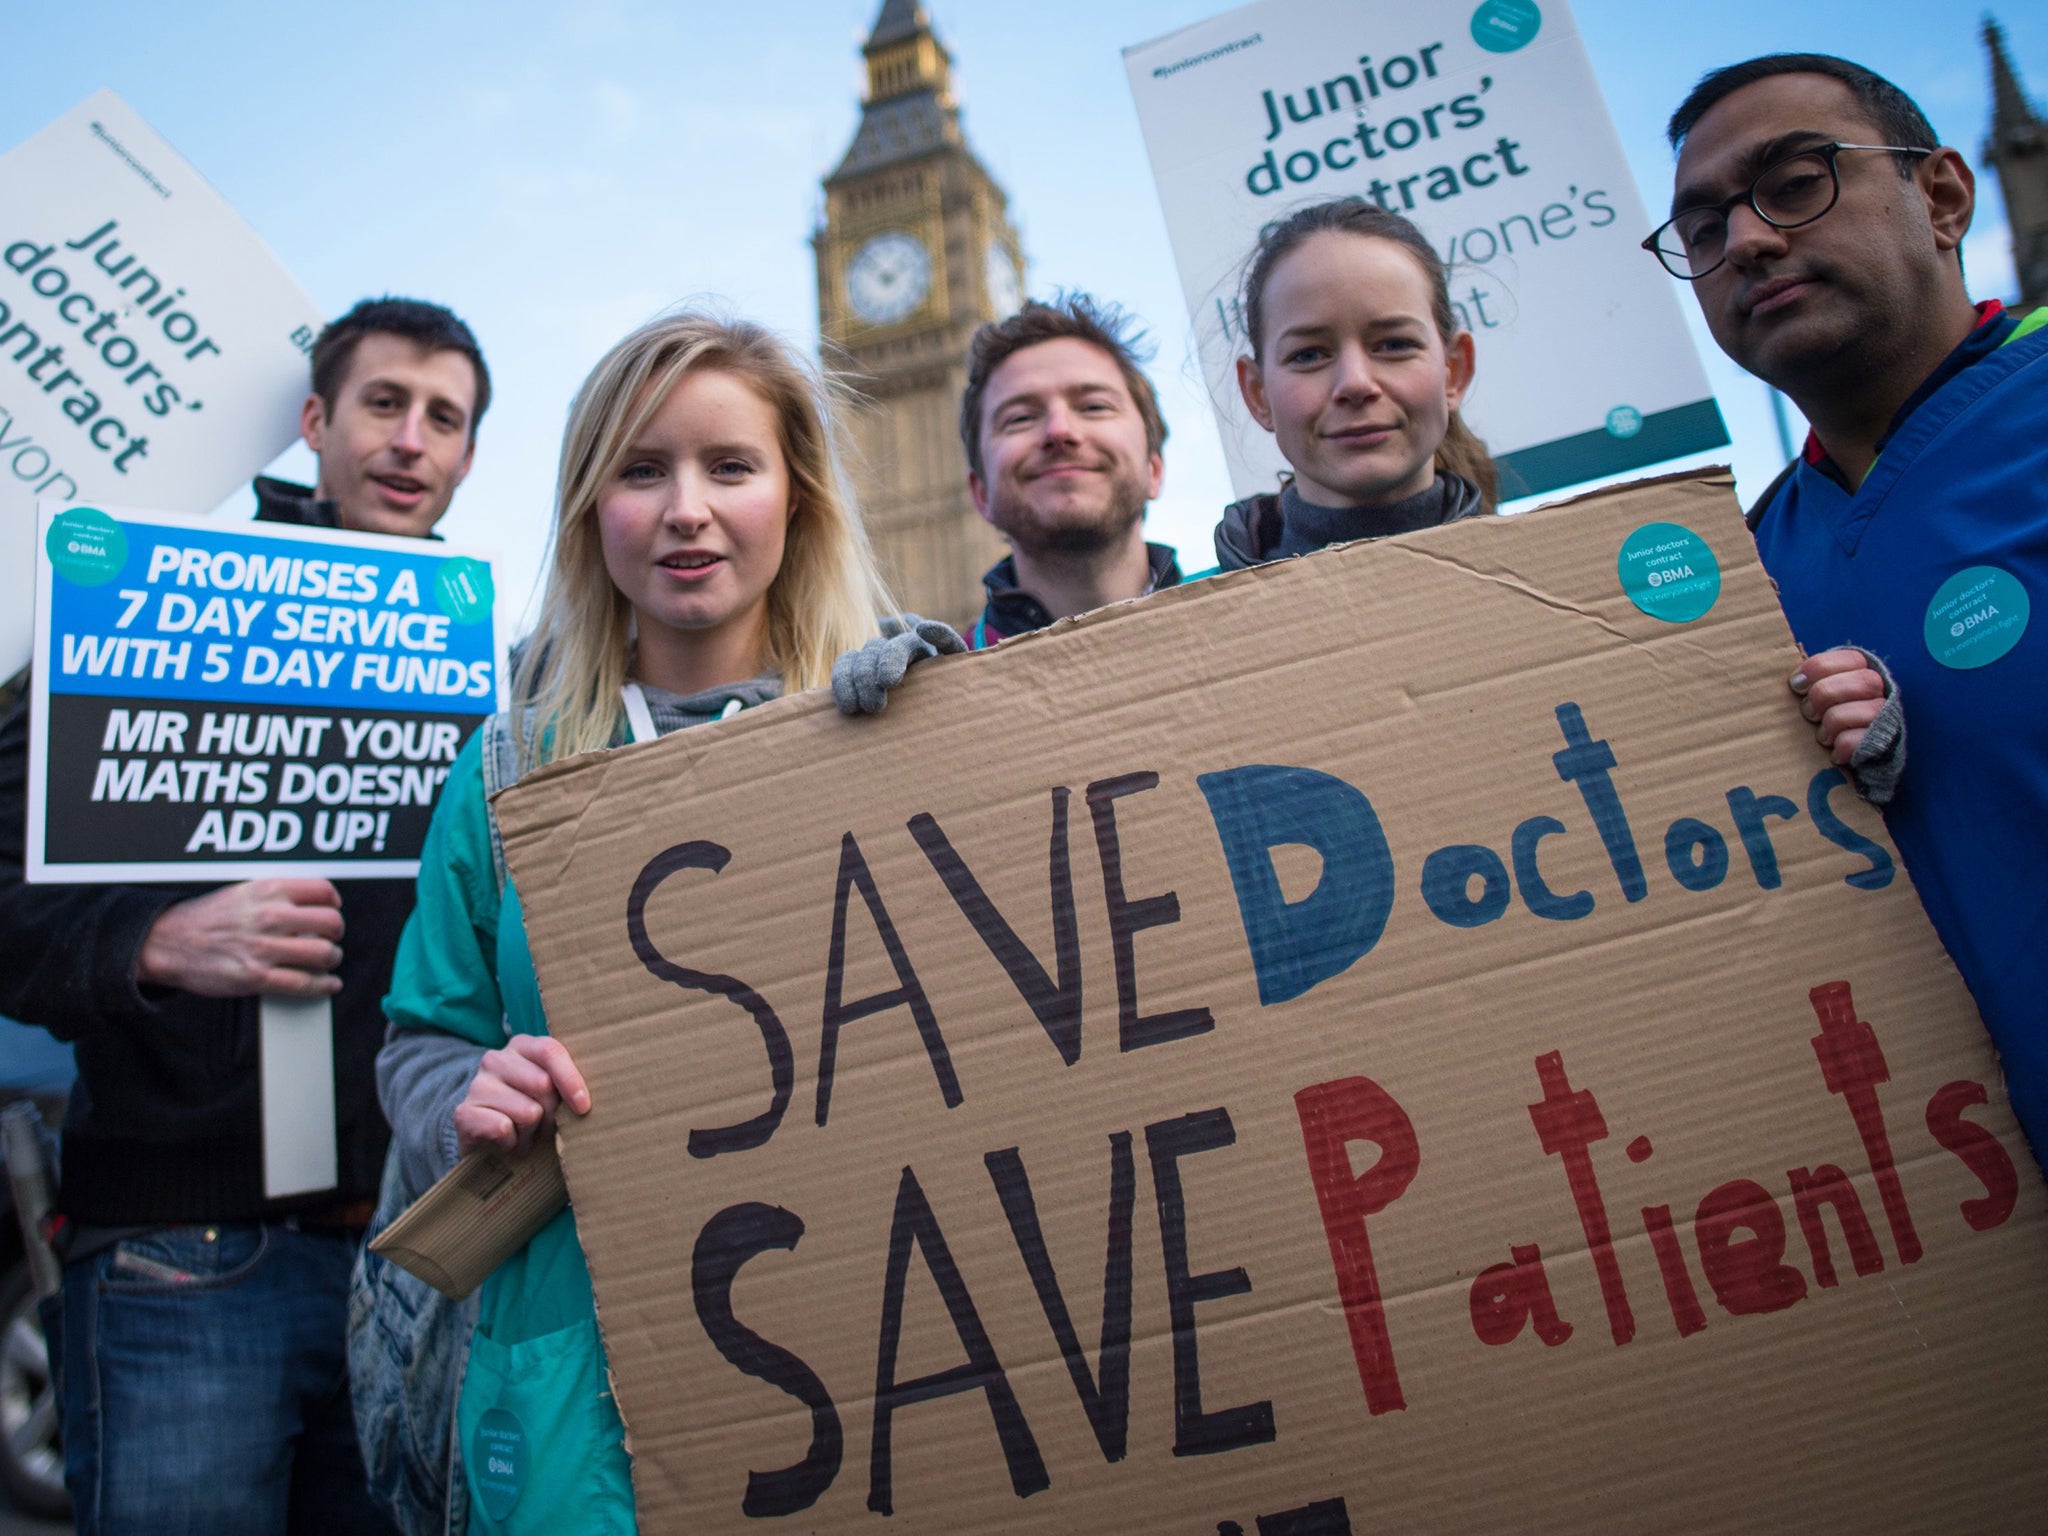 Junior doctors and medical students demonstrate outside the Houses of Parliament in London as part of a nationwide one day strike in a dispute with the government over new contracts